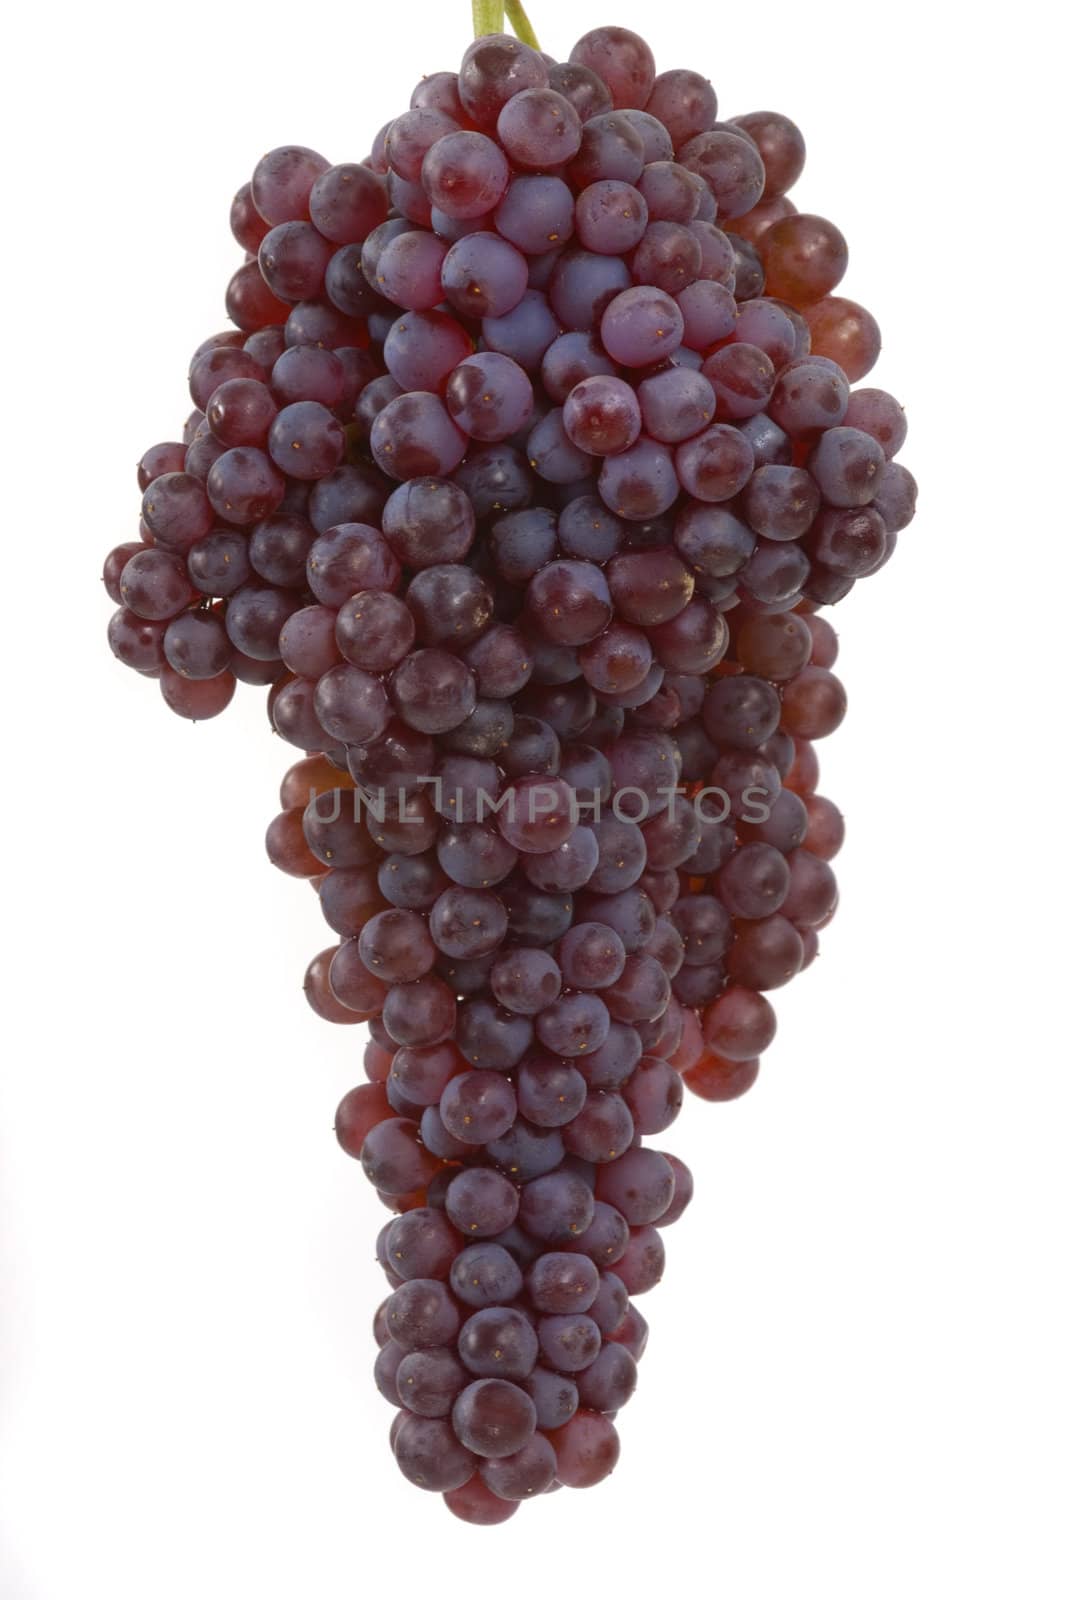 Gourmet champagne grapes